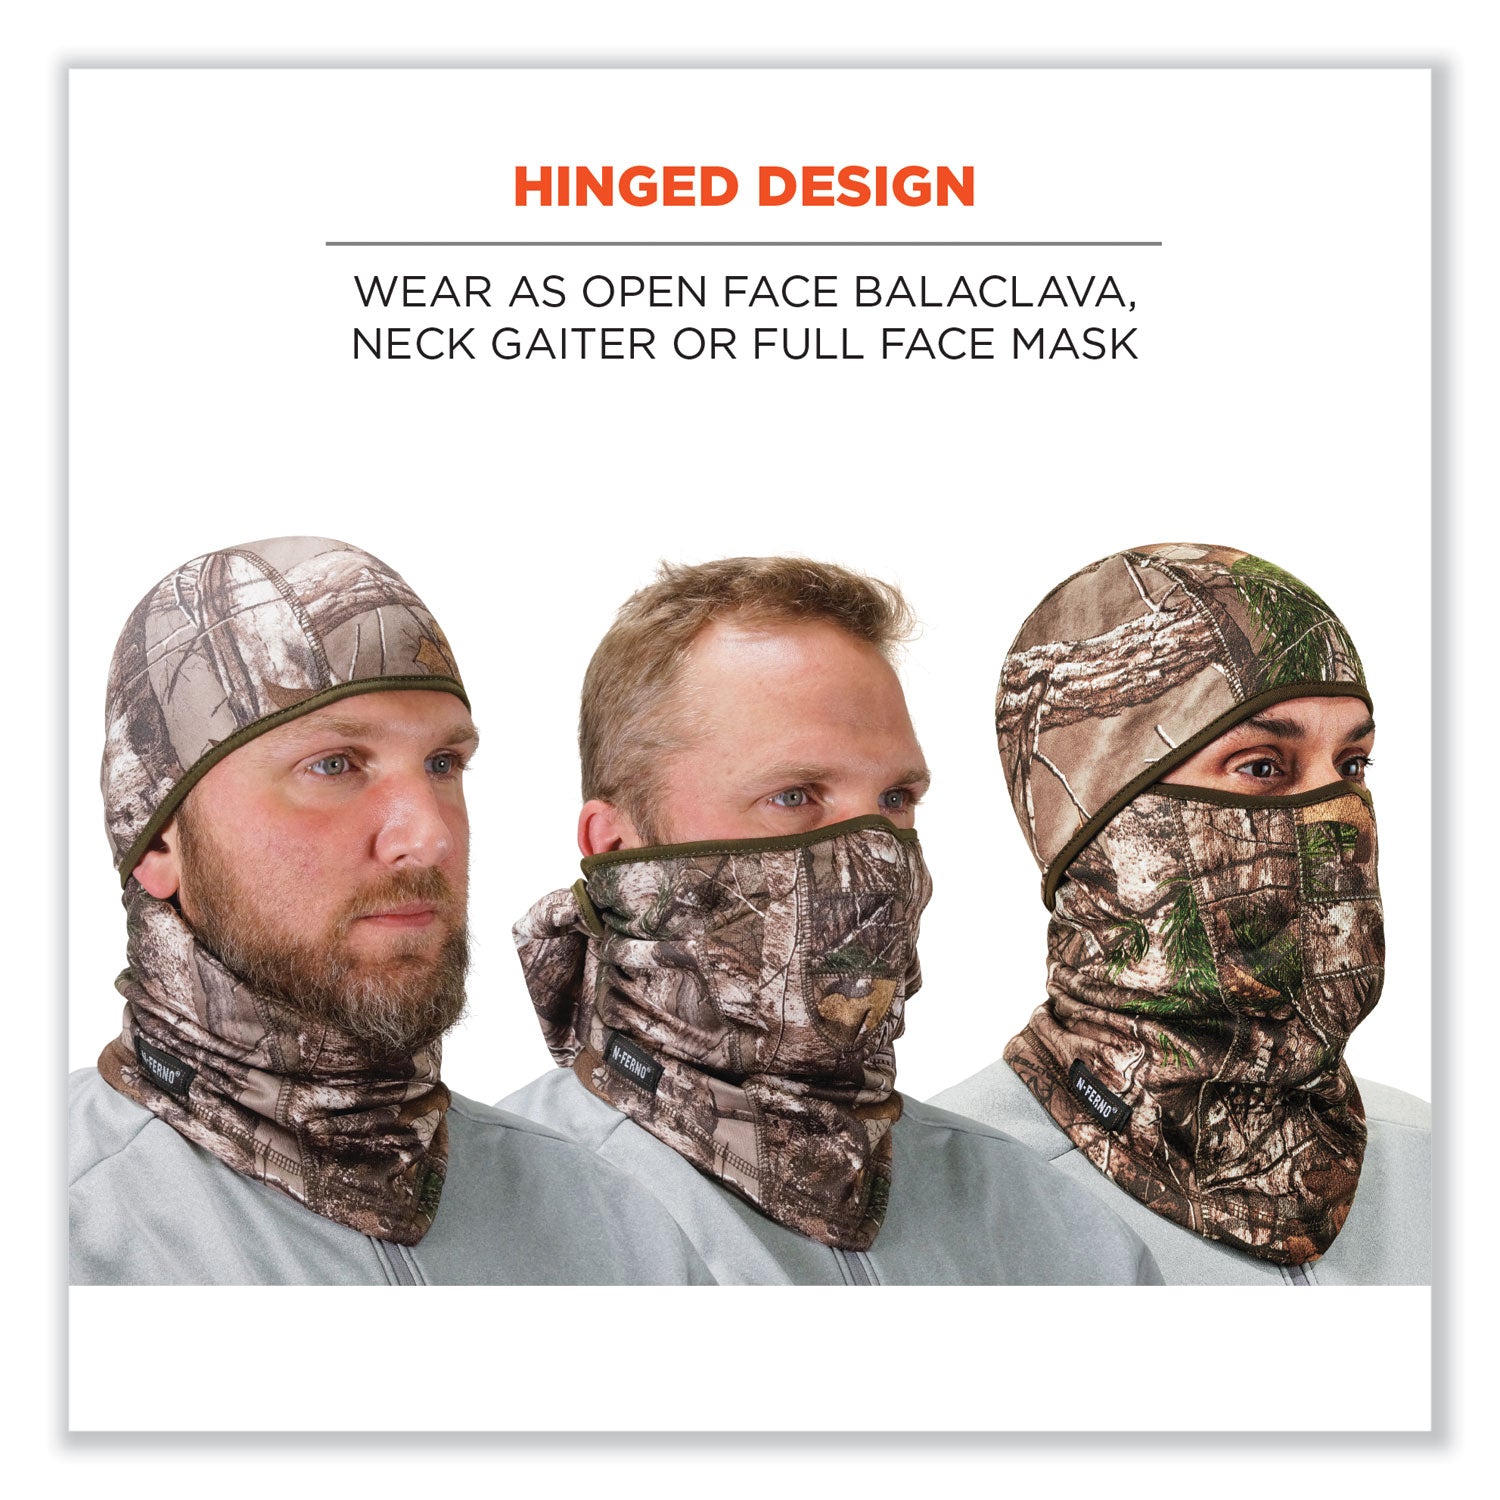 n-ferno-6823-hinged-balaclava-face-mask-fleece-one-size-fits-most-realtree-edge-ships-in-1-3-business-days_ego16833 - 6